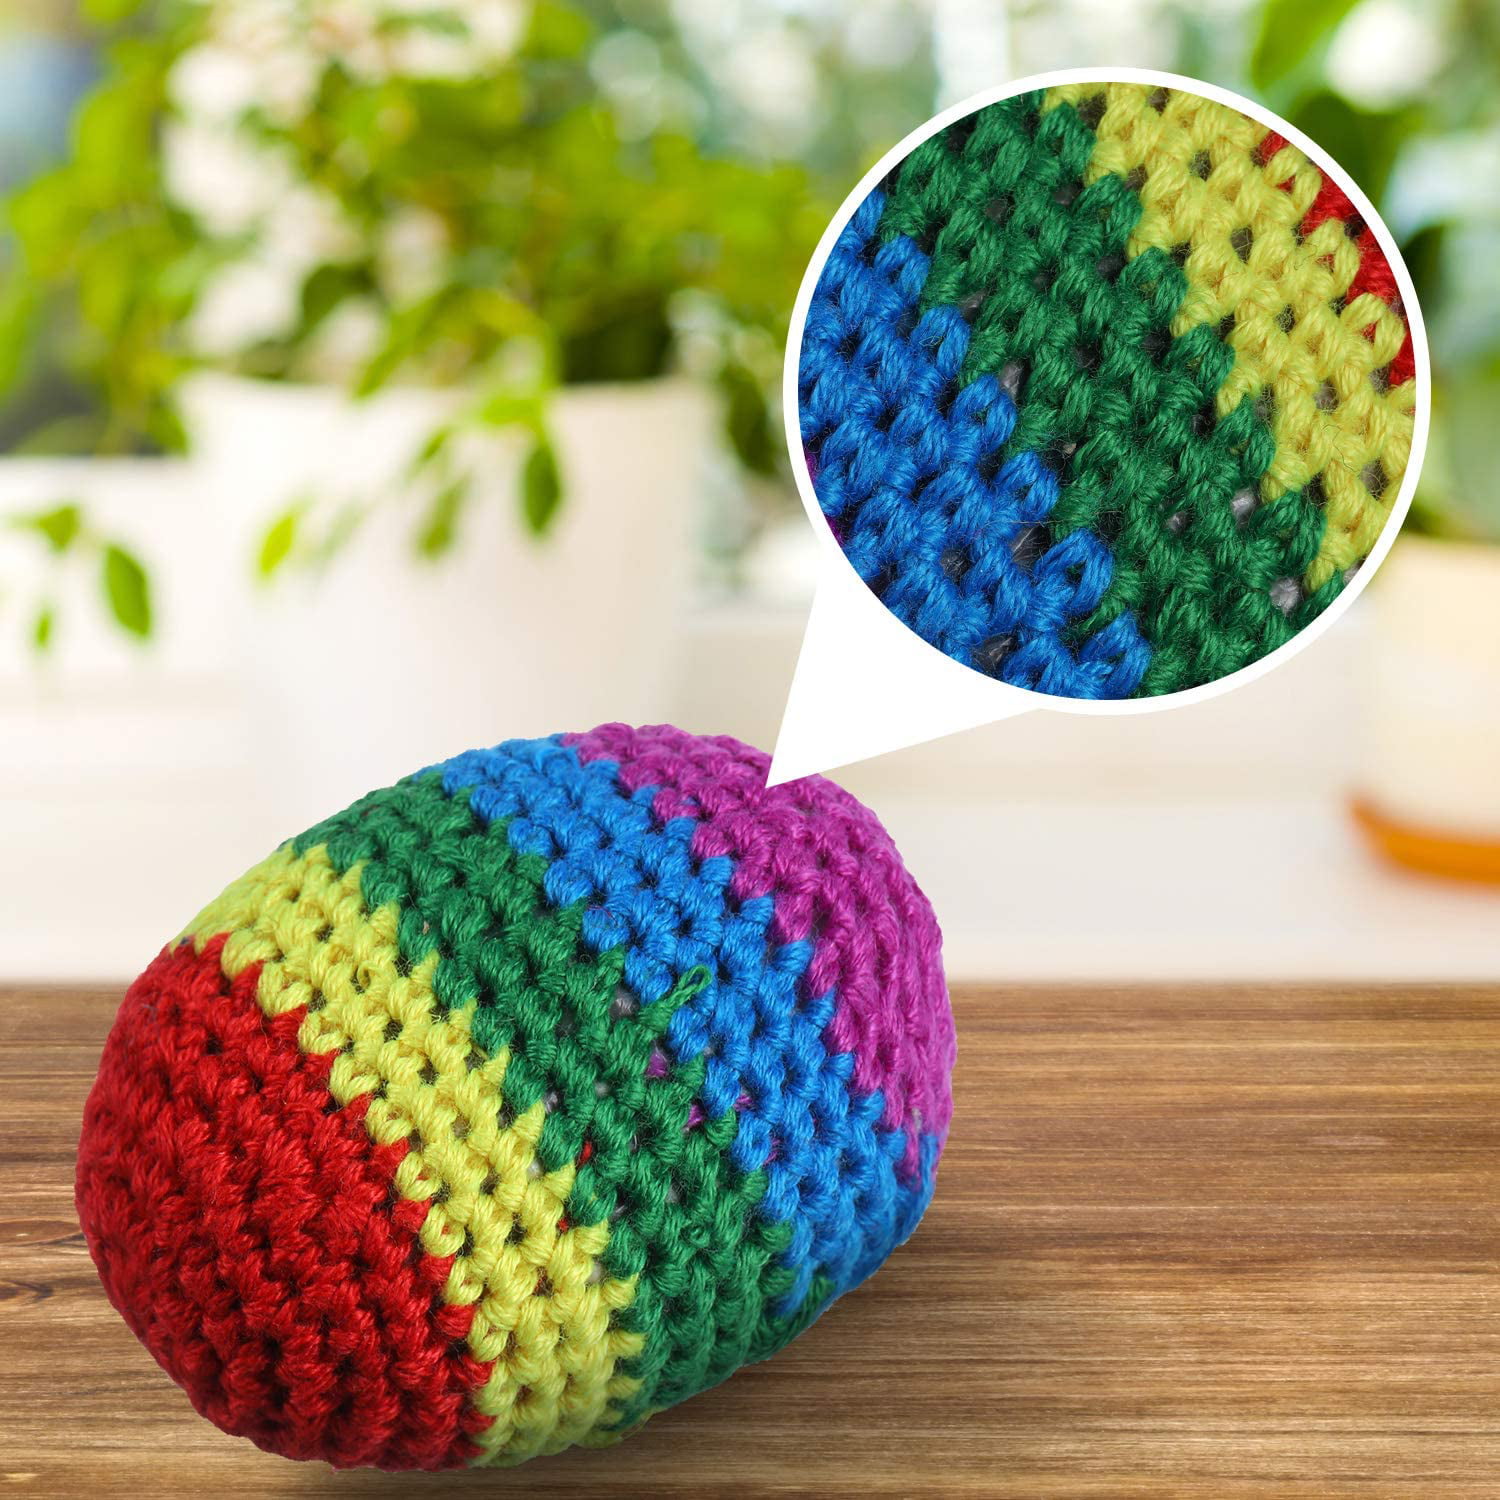 Blulu 5 Pieces Funny Hacky Ball Sacks Assoerted Colors Woven Kickball Soft Knitted Kick Balls for Children and Beginners 